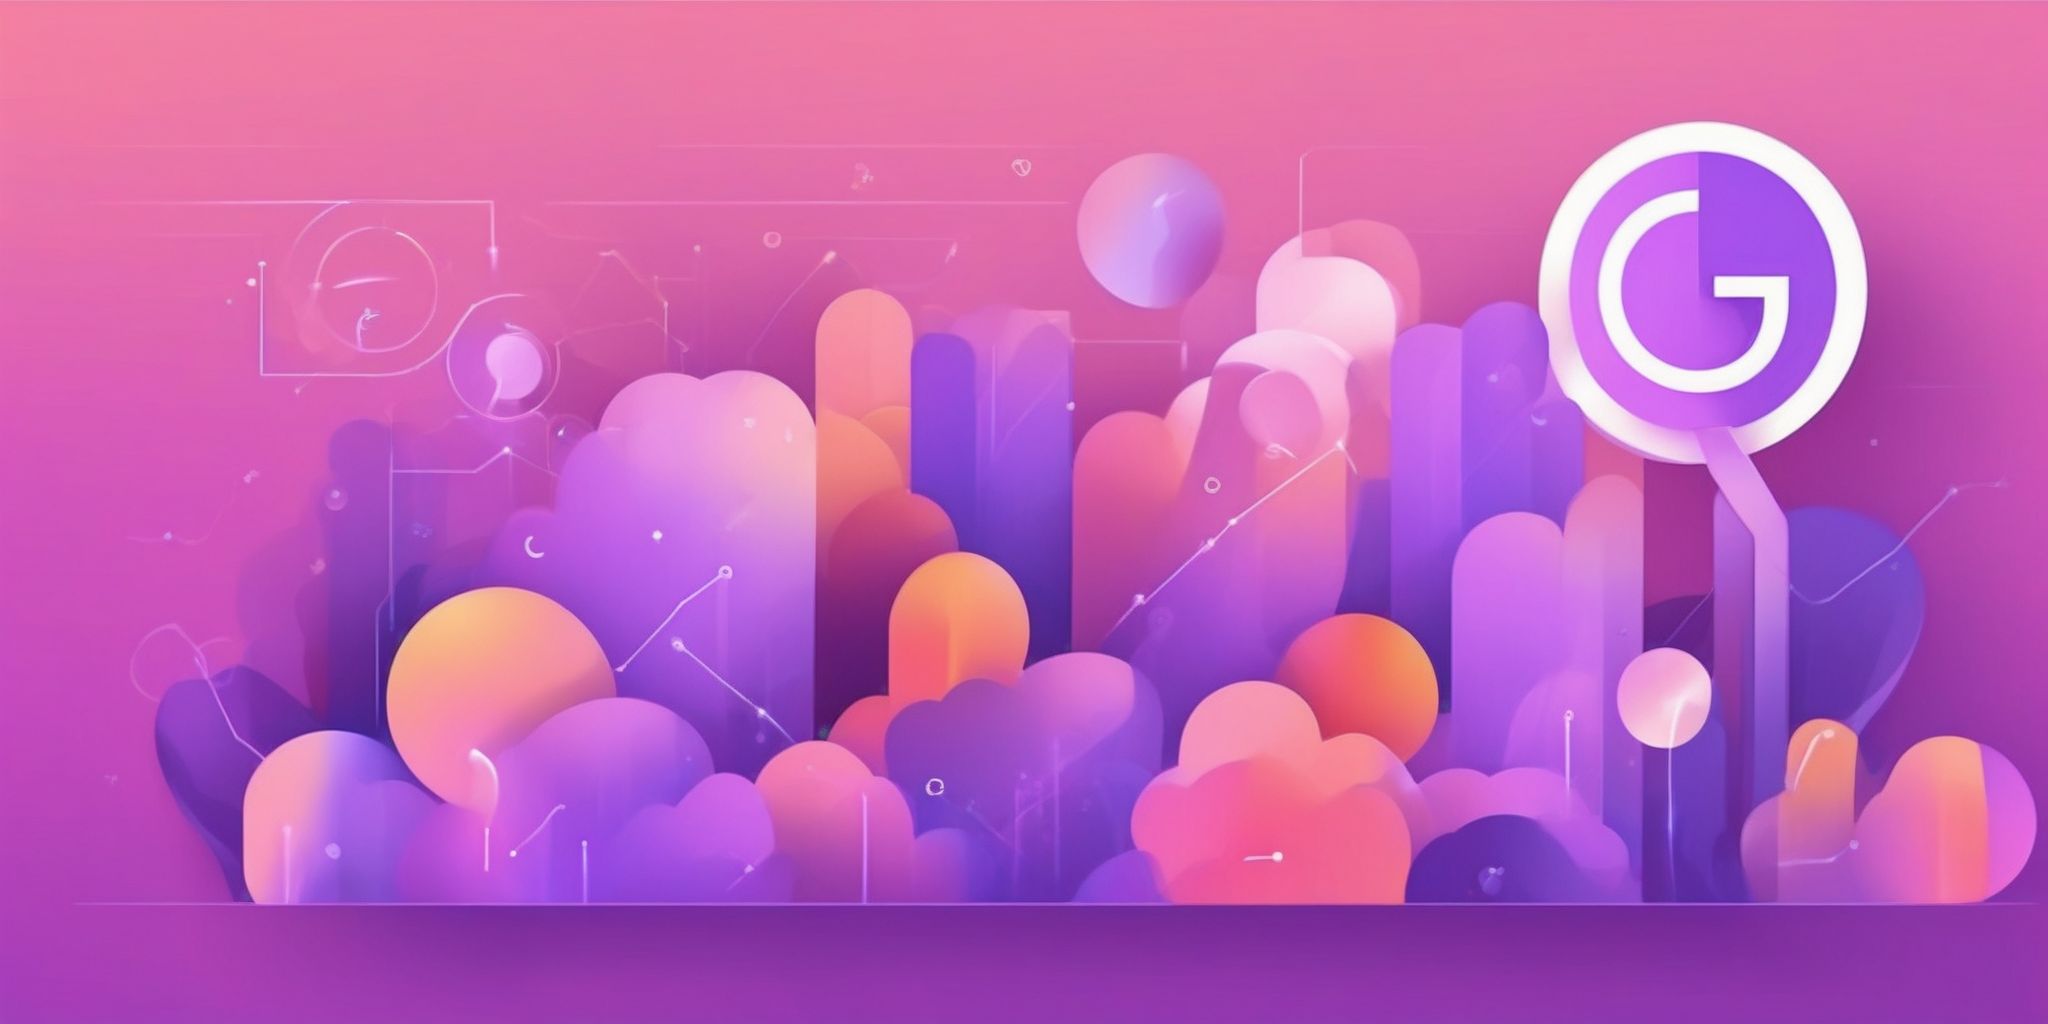 Google search - Zoom in flat illustration style, colorful purple gradient colors